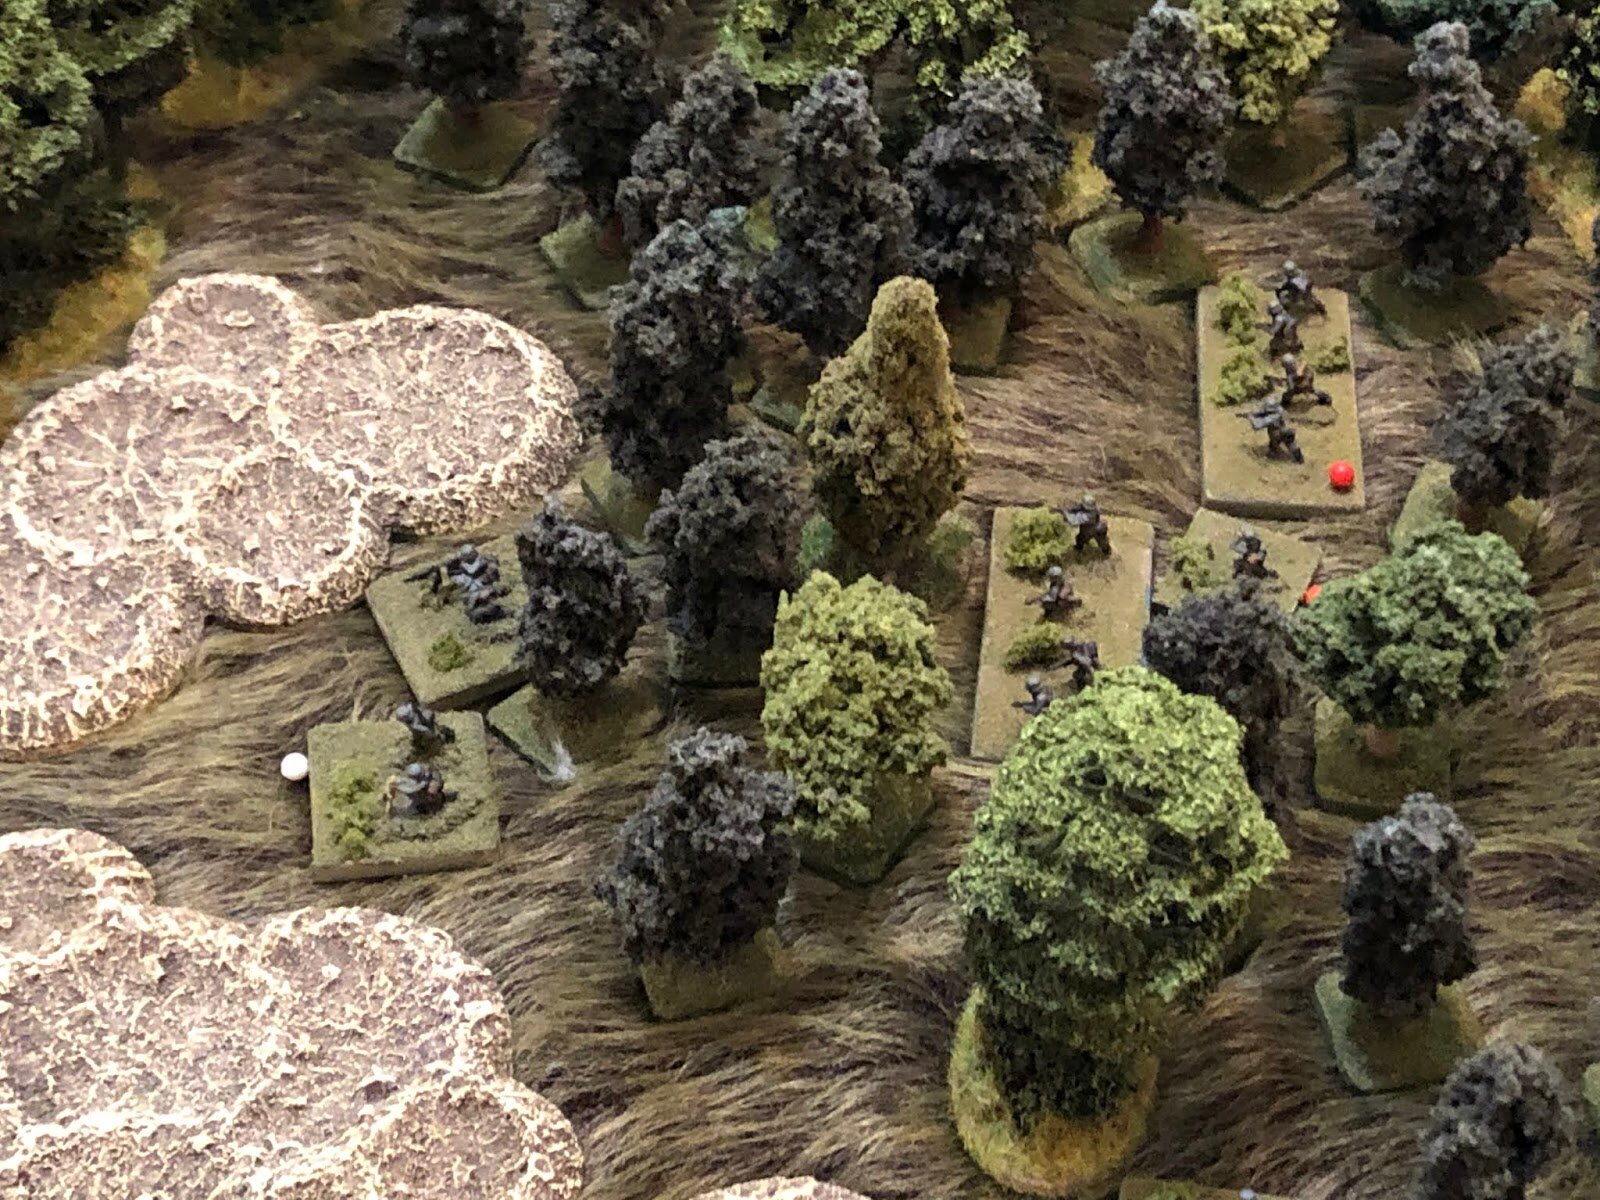  On the objective, the German MG Team is back in the fight, and they move up to get back into position (left). When they get there they find mortar team 2 still 'men down,' so they try to rally them, but it ain't happening...  